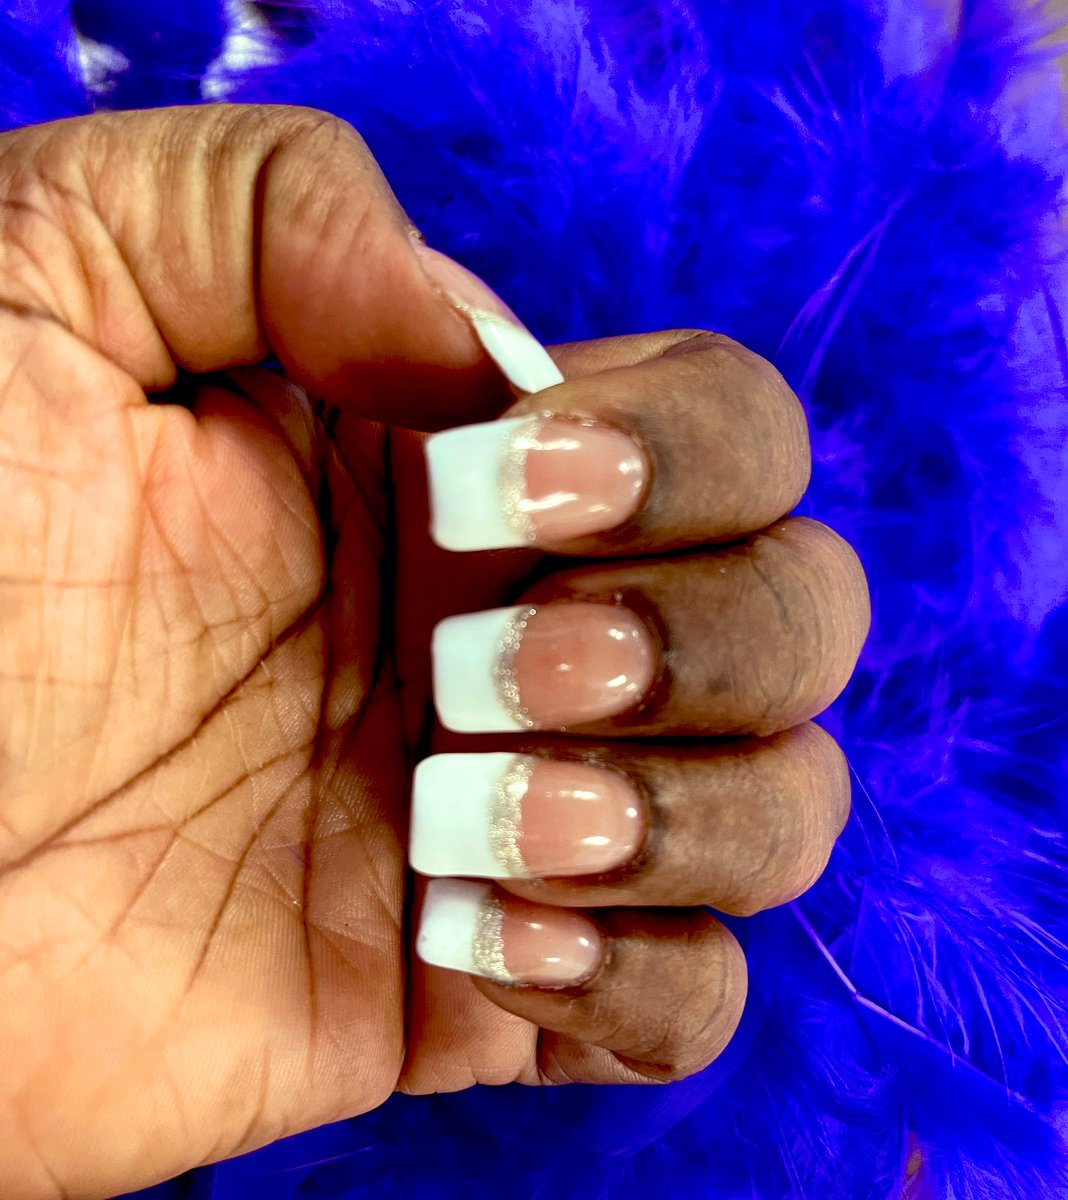 Huge shoutout to the talented #Cosmetology students who worked their magic on my nails! 💅🏾 Their hard work and skills truly shine! Thank you for the fabulous job! #GettinItDone #SkillsMatter #NHRECCTE  #LeadBoldly #WeAreNewHorizons 
@NHREC_VA